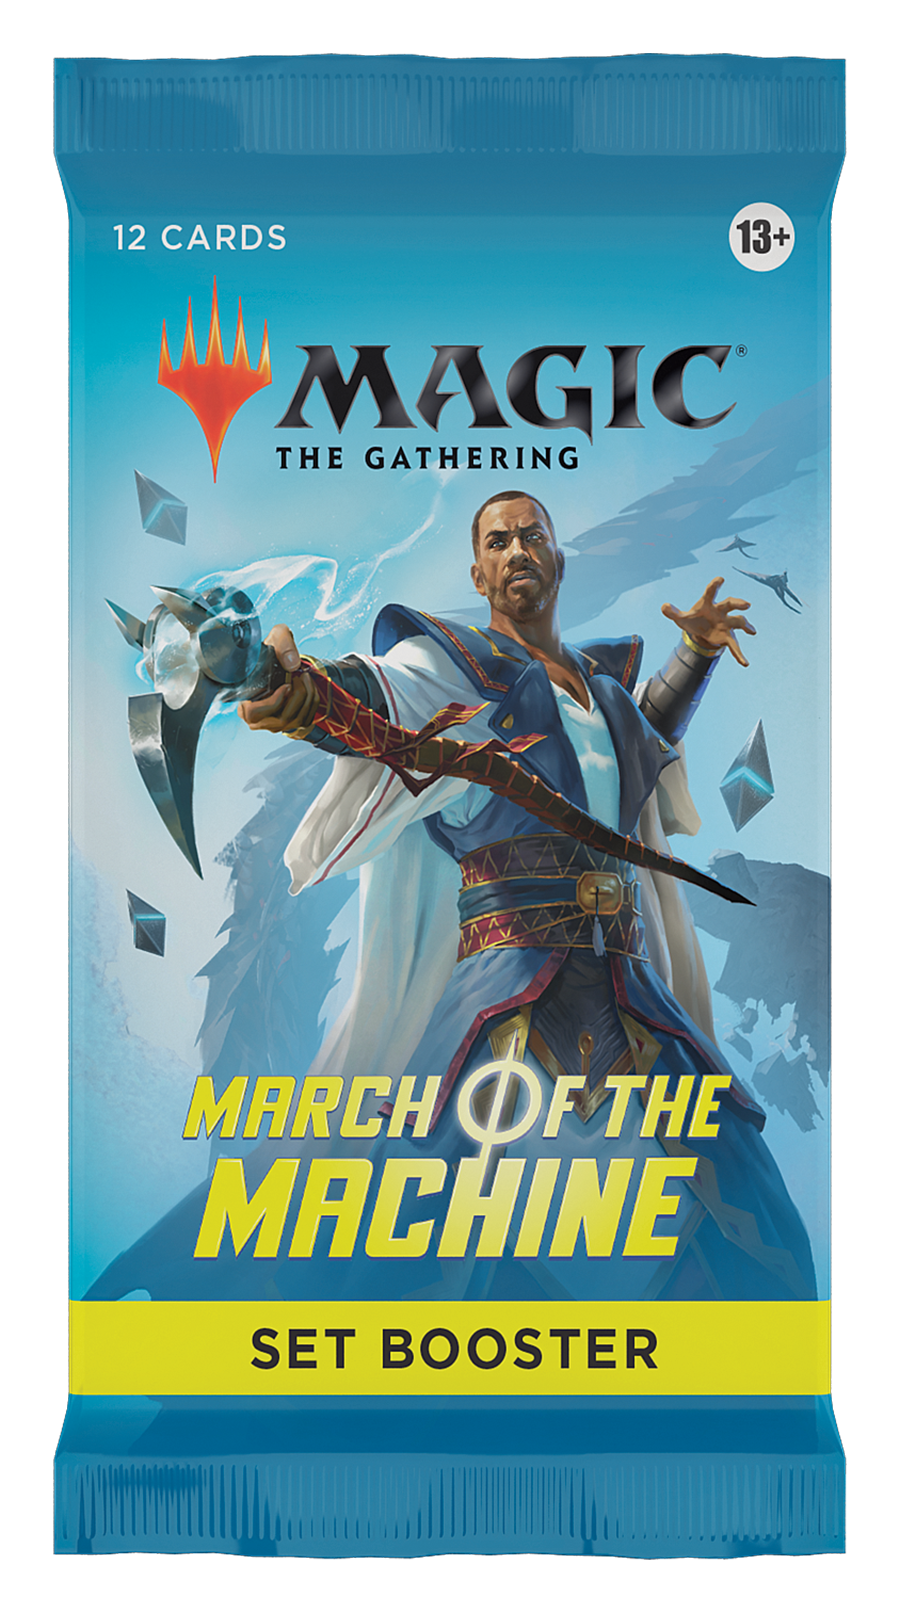 March of the Machine - Set Booster Pack | Shuffle n Cut Hobbies & Games